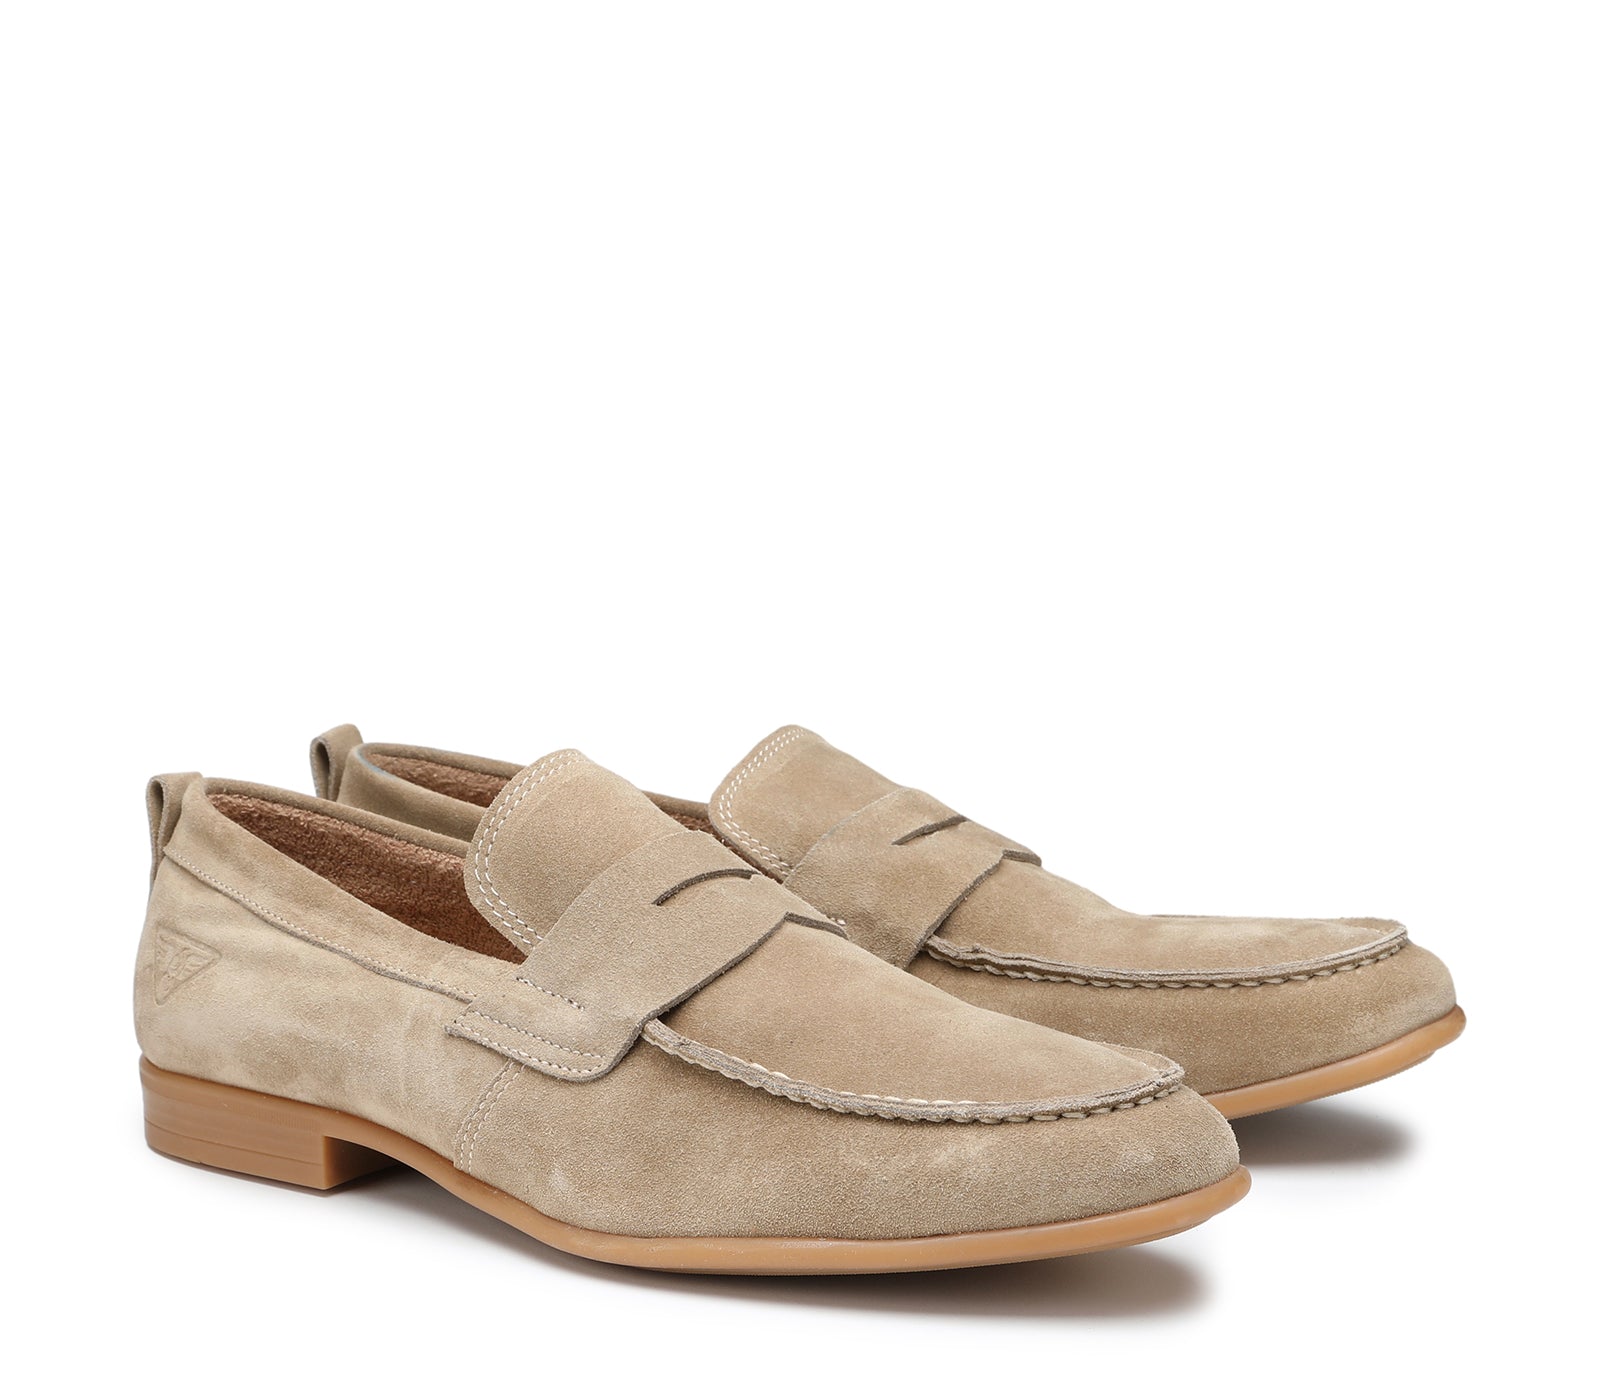 Men's Moccasins in Soft, Sand-colored Suede with Rubber Sole 